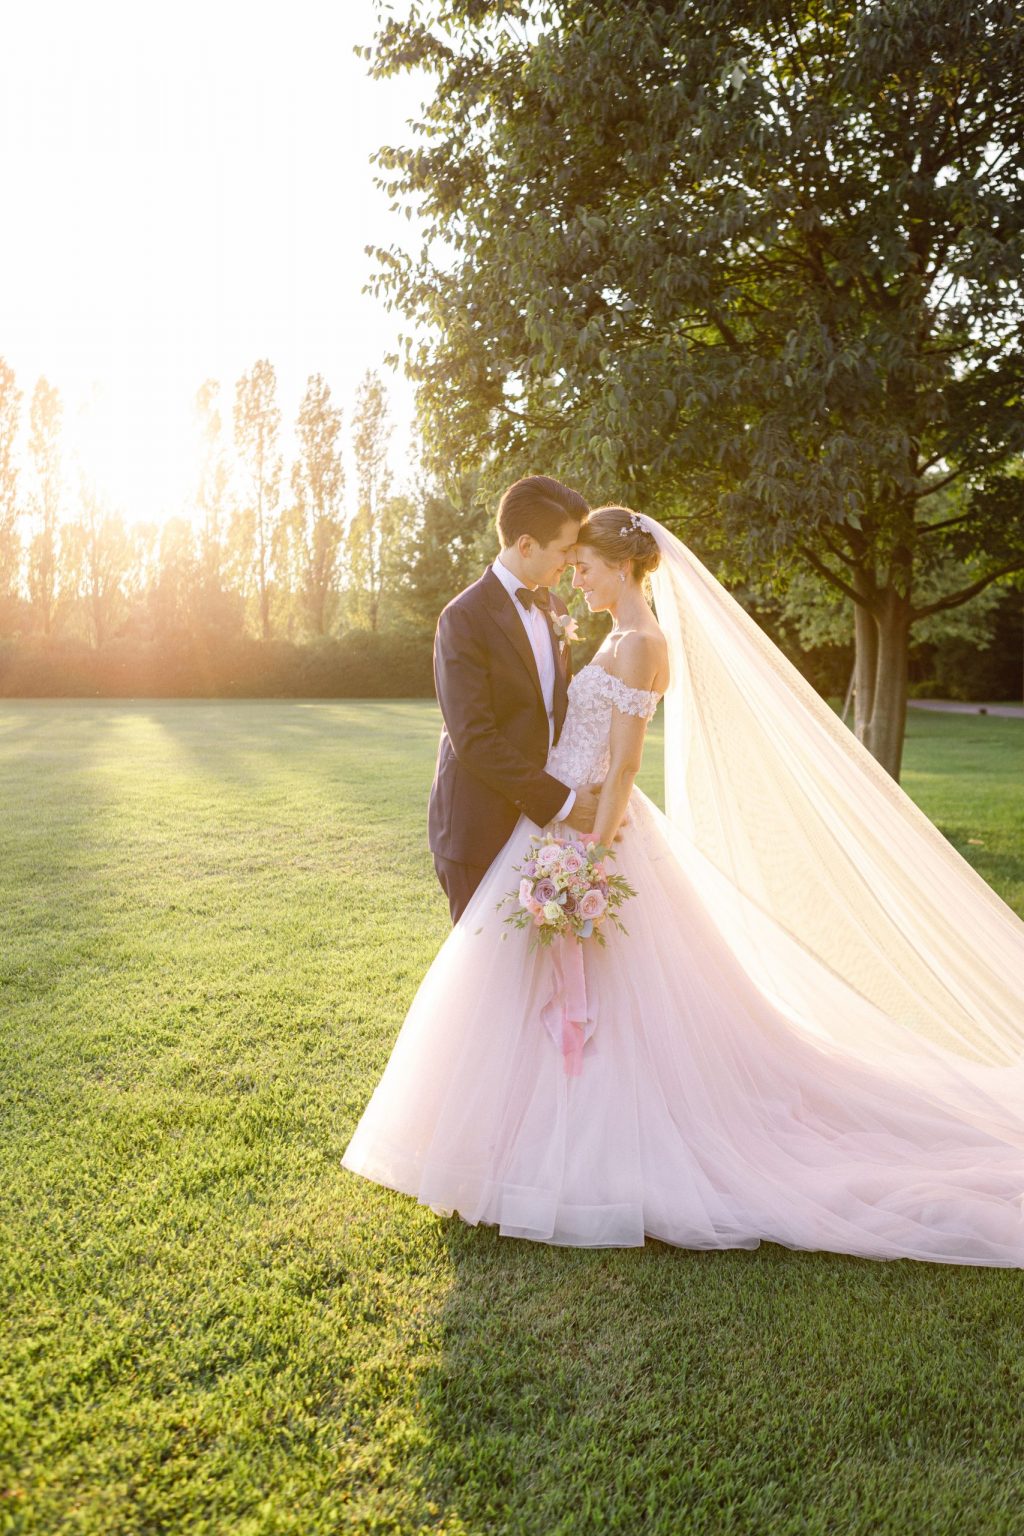 Kiss bride groom Elegant Countryside Wedding in the North of Italy, Treviso Venice